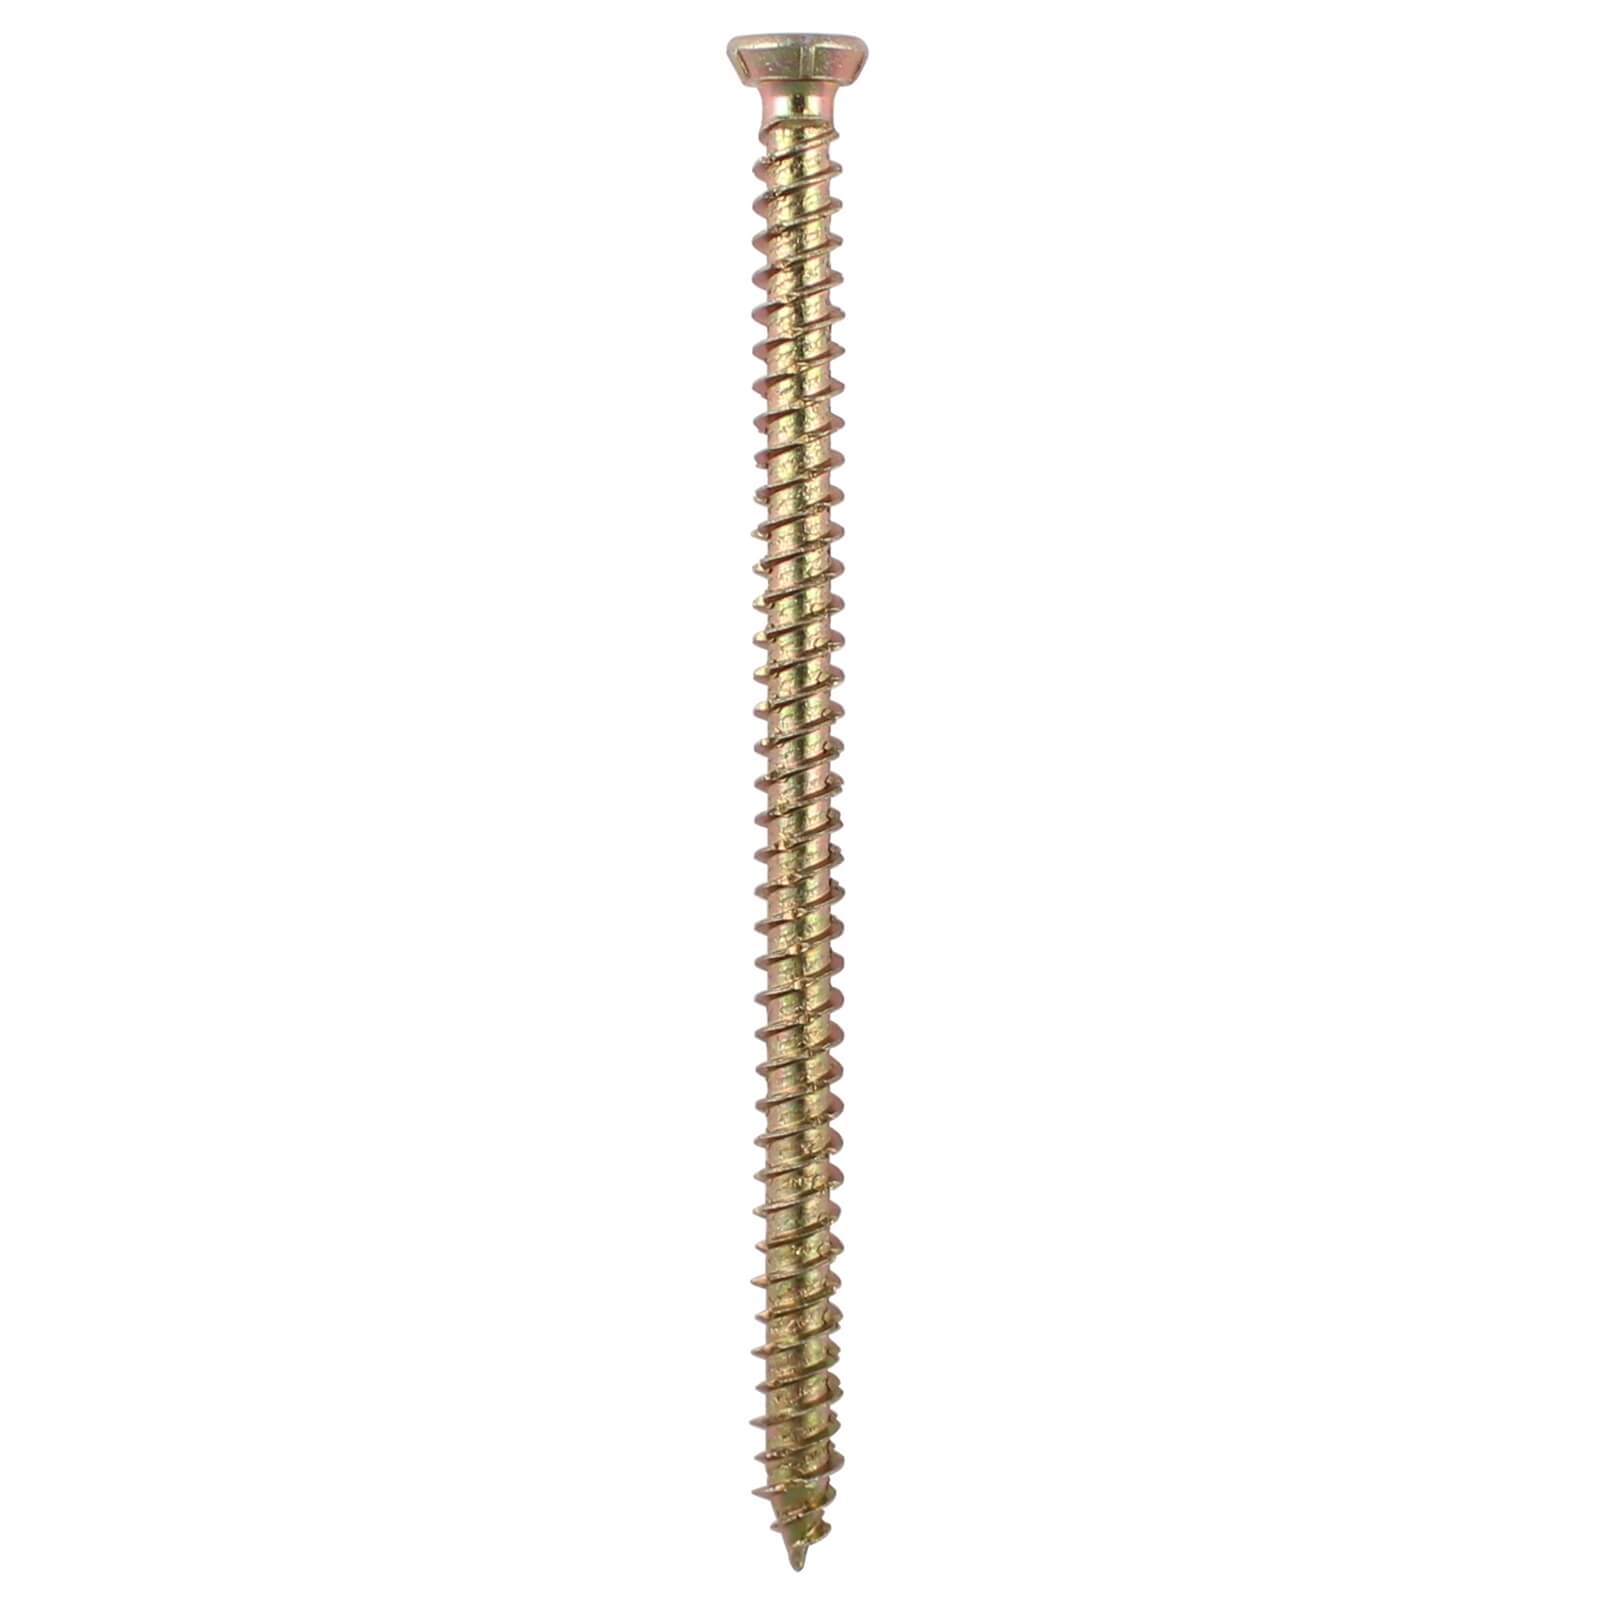 Concrete Screw Zyp 7.5mm x 120mm - Pack of 45